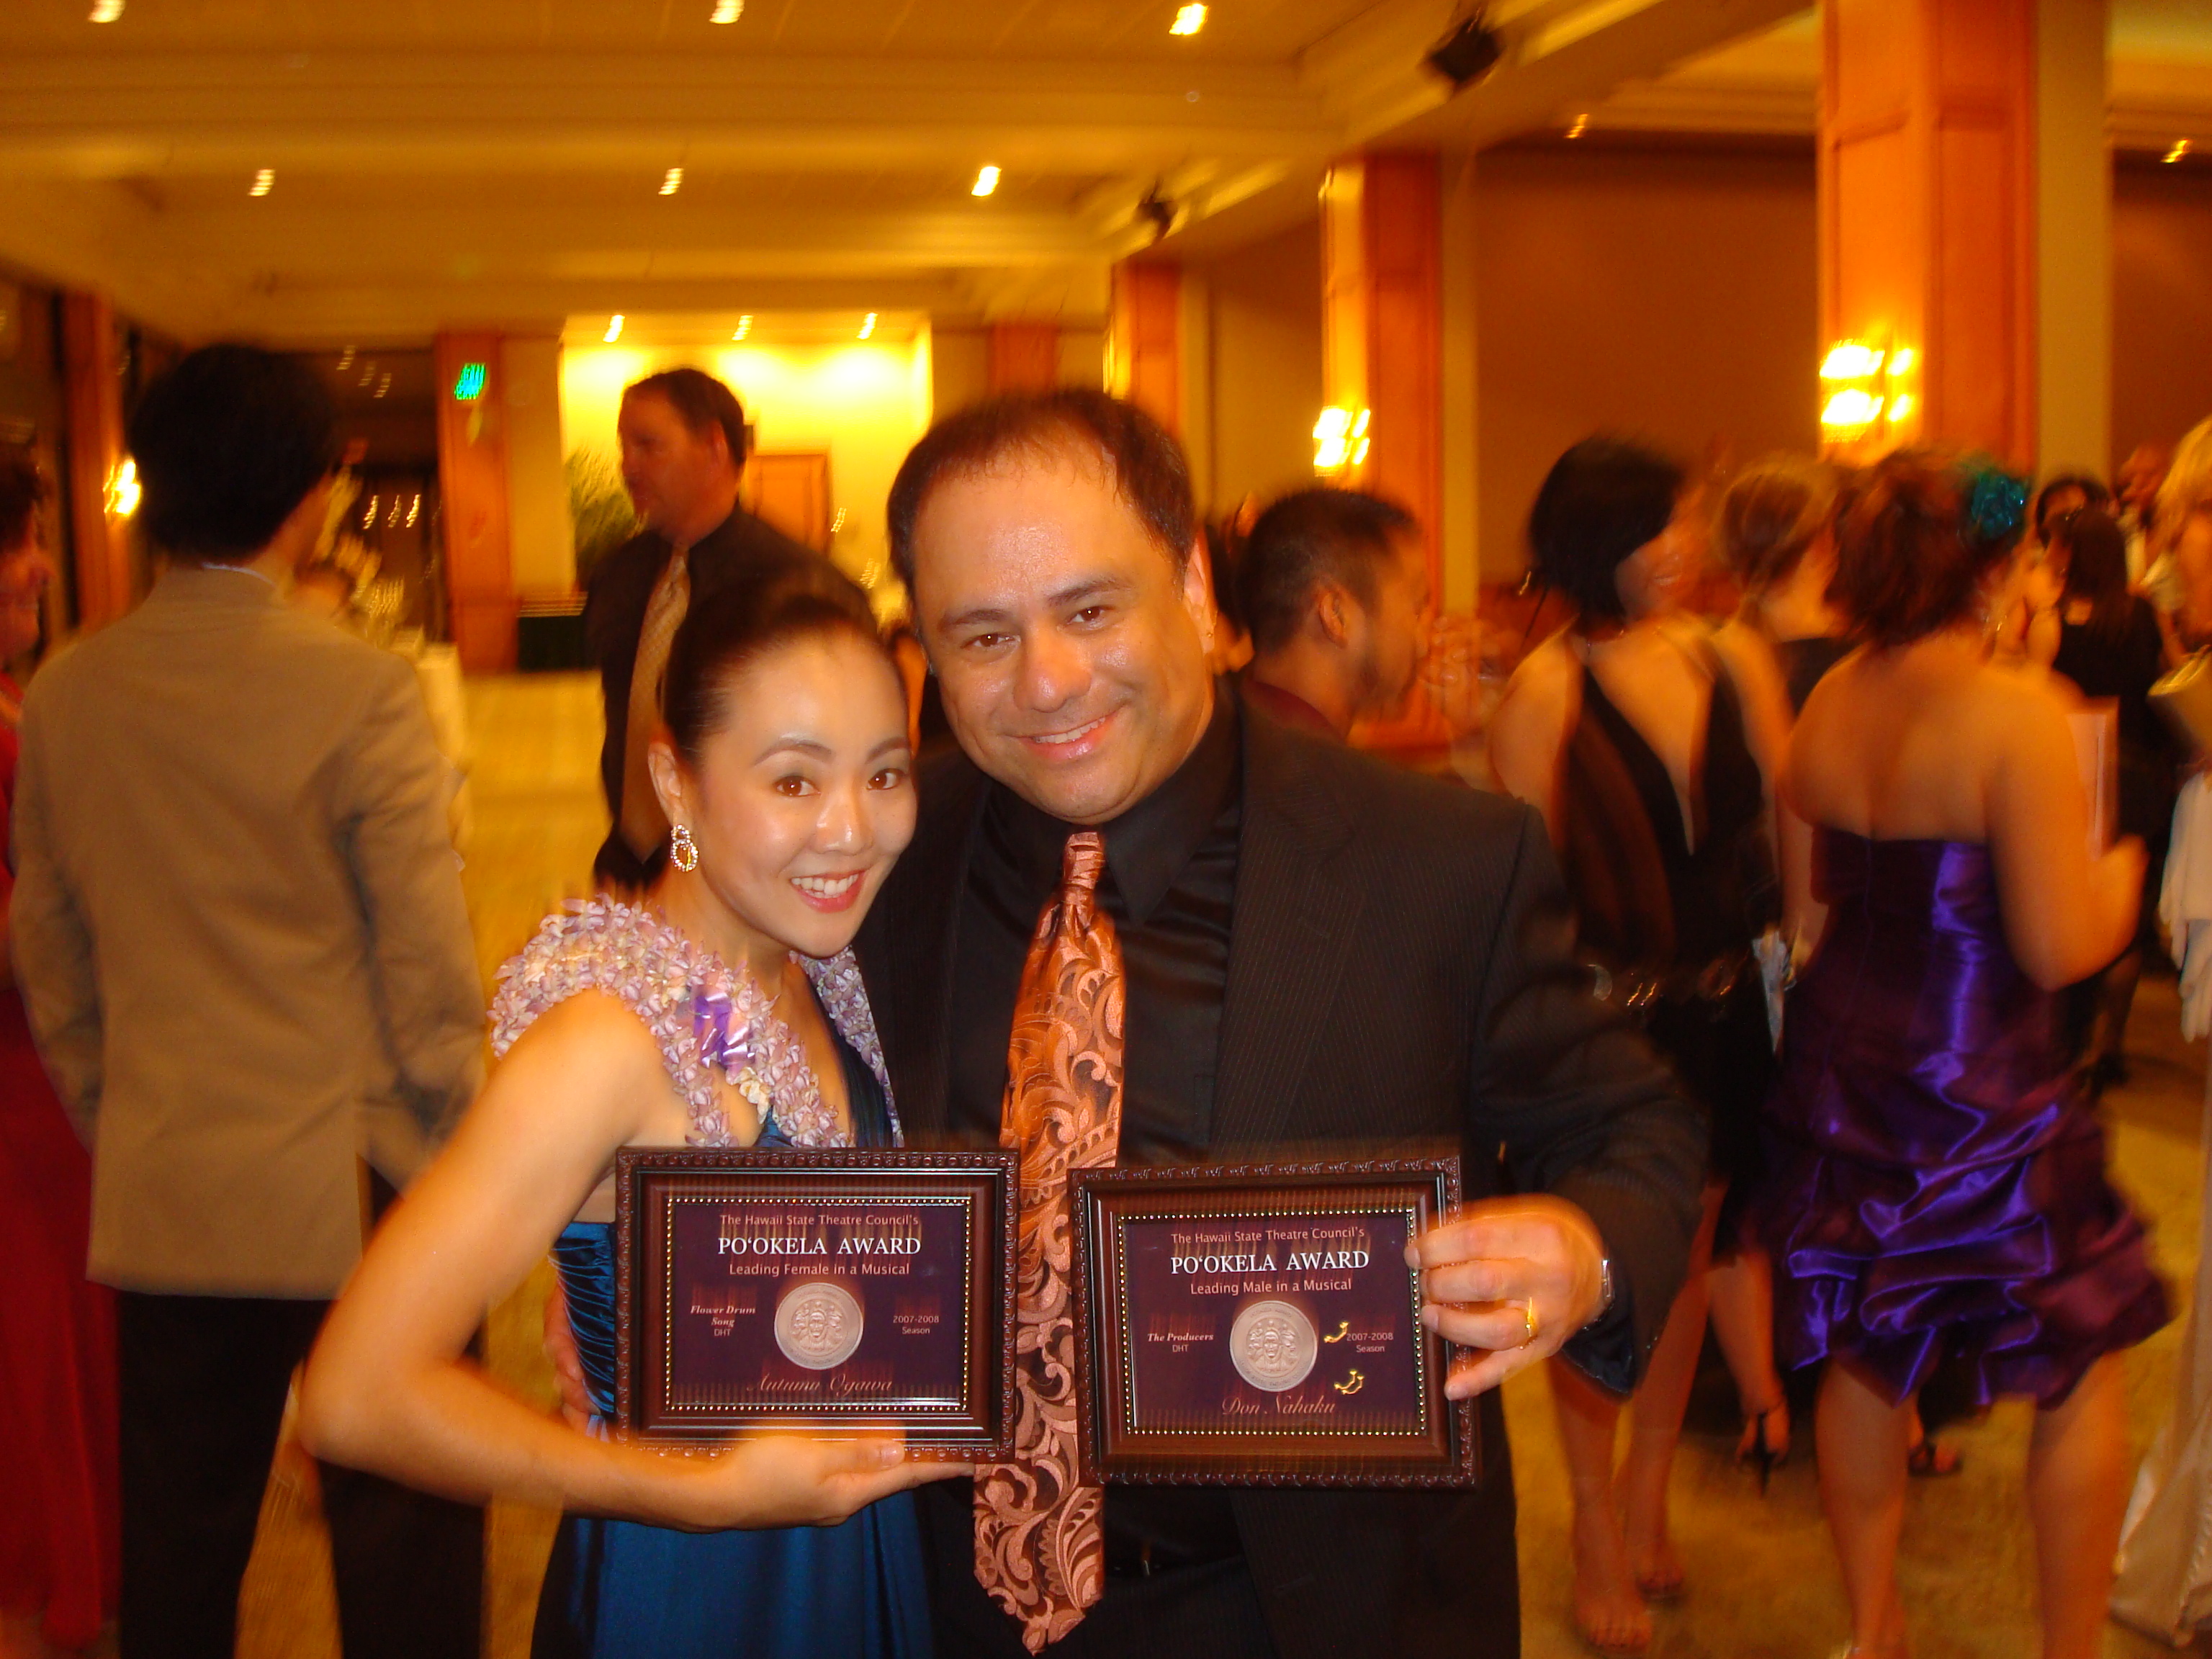 Don Nahaku wins Po'okela Award for Lead Actor in a Musical playing Leo Bloom in THE PRODUCERS.